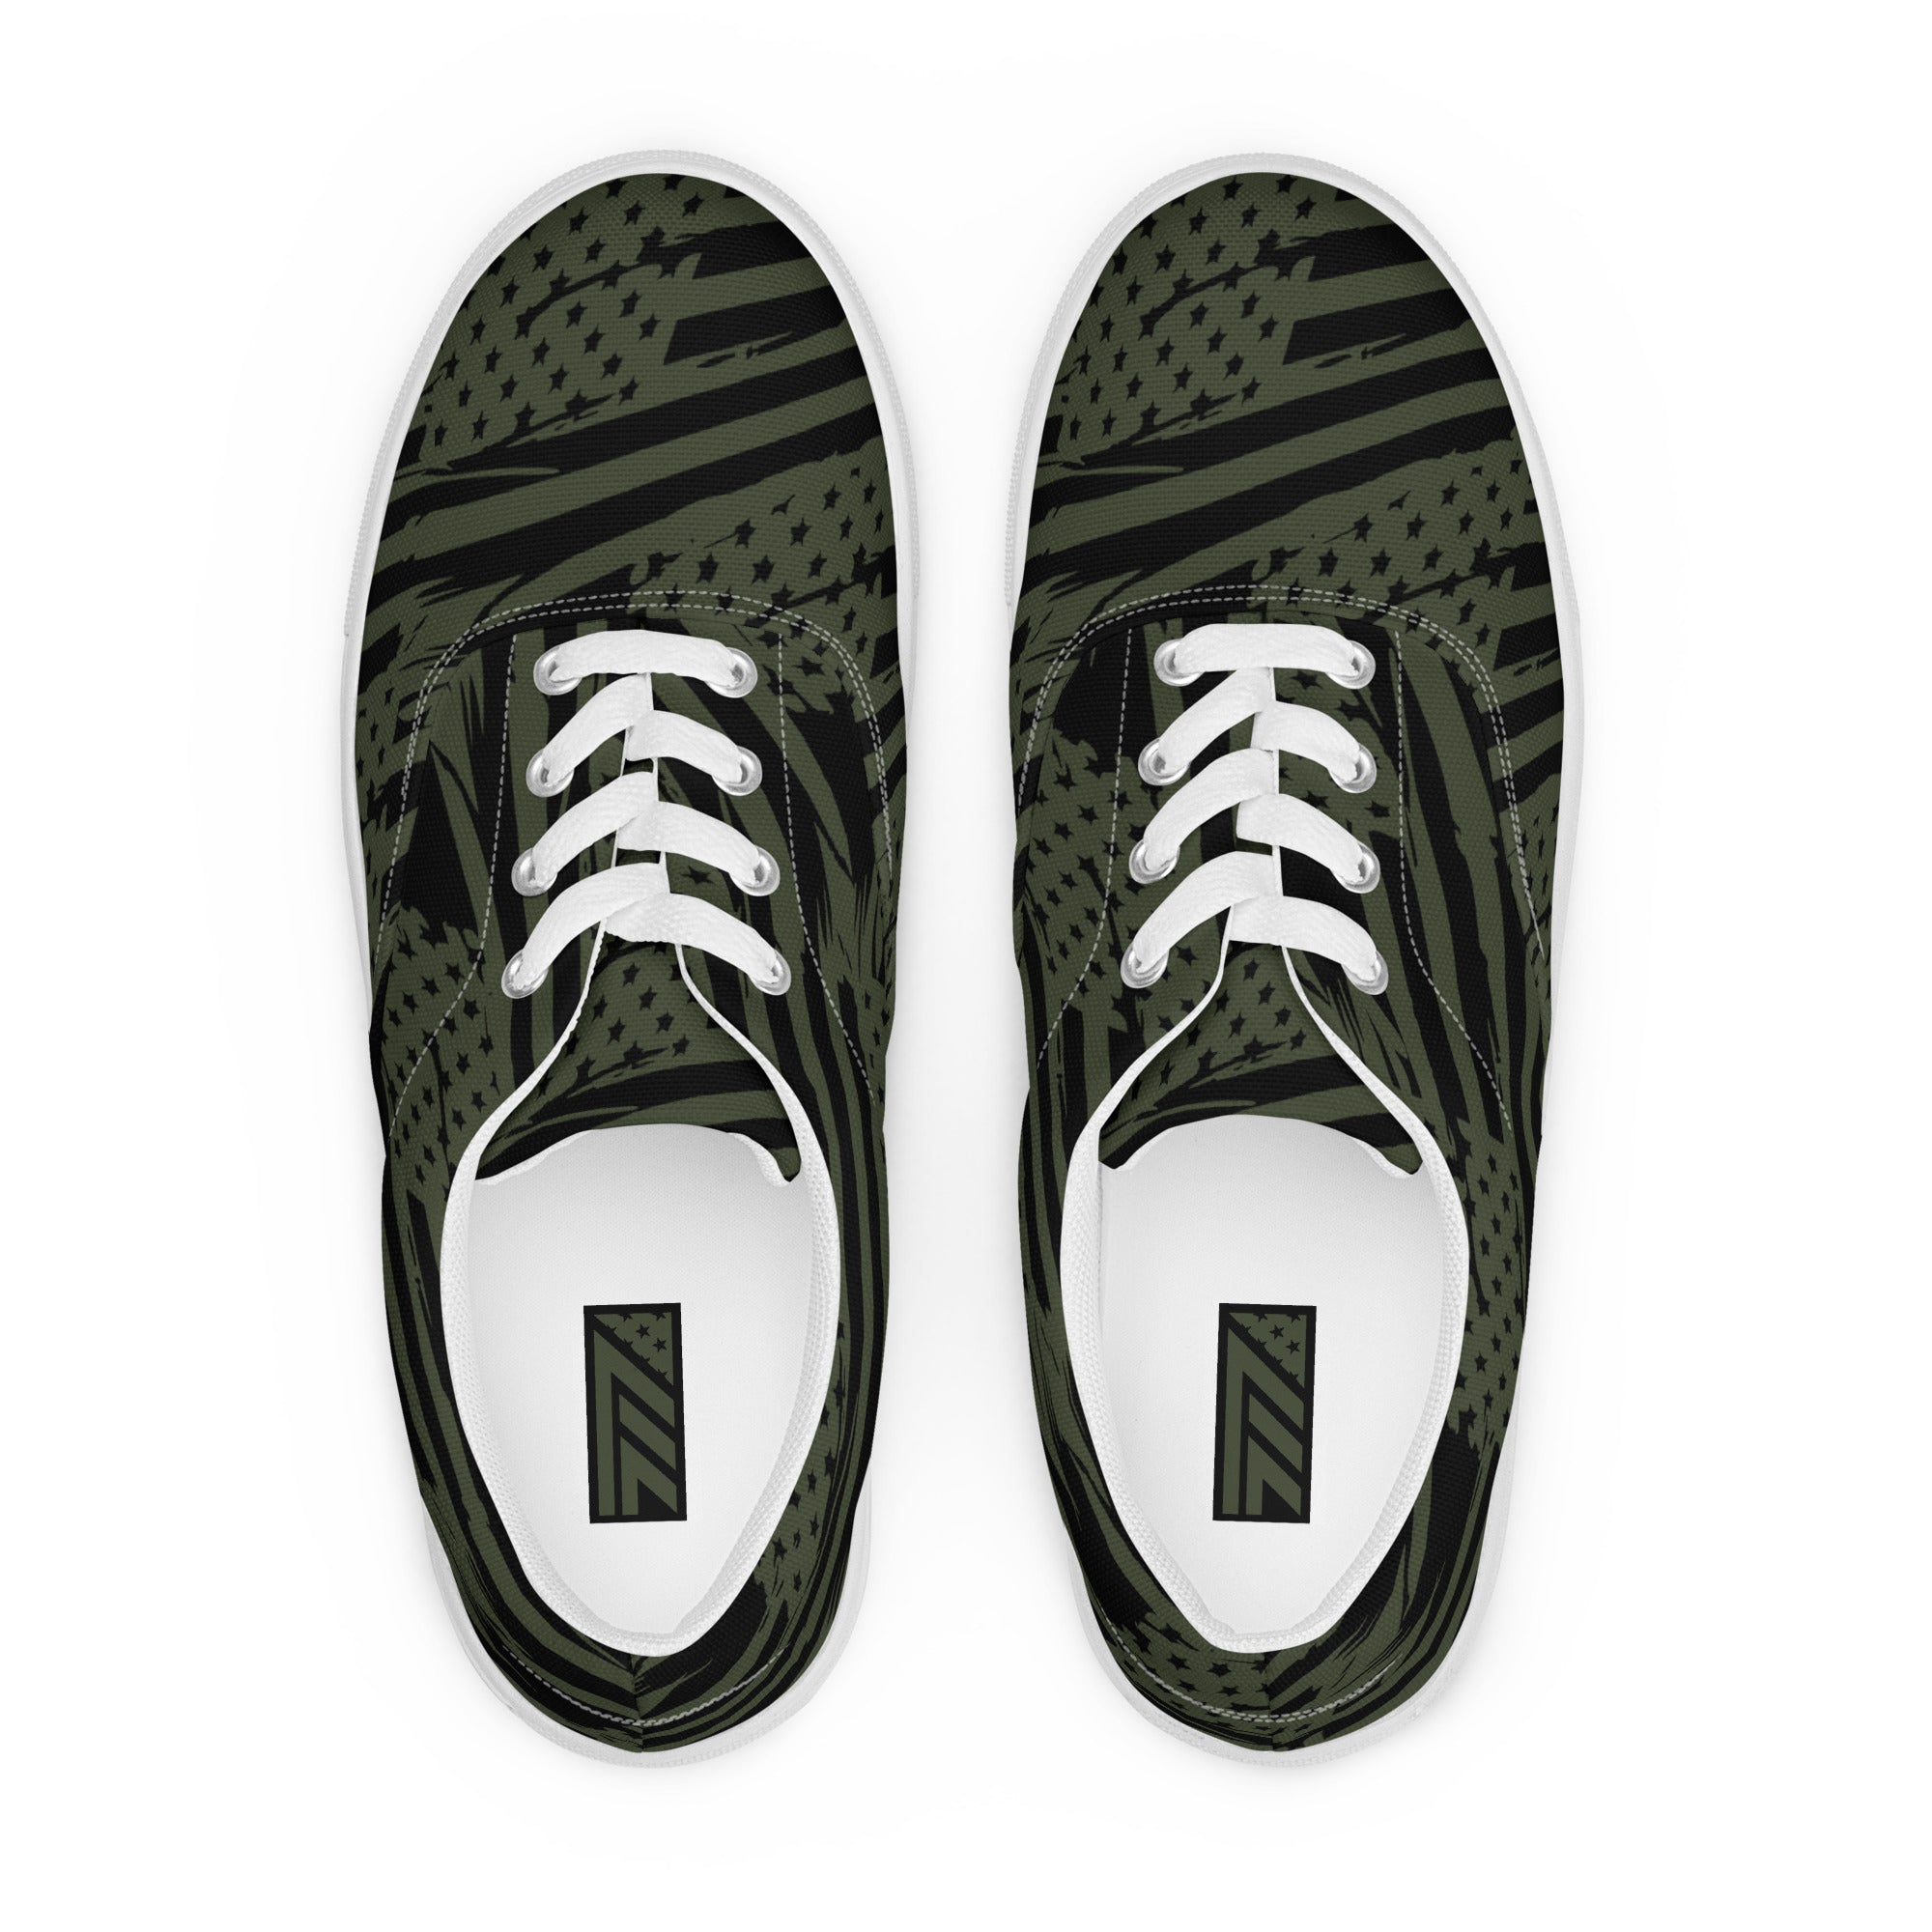 Old Glory Black/ODG Canvas Shoes